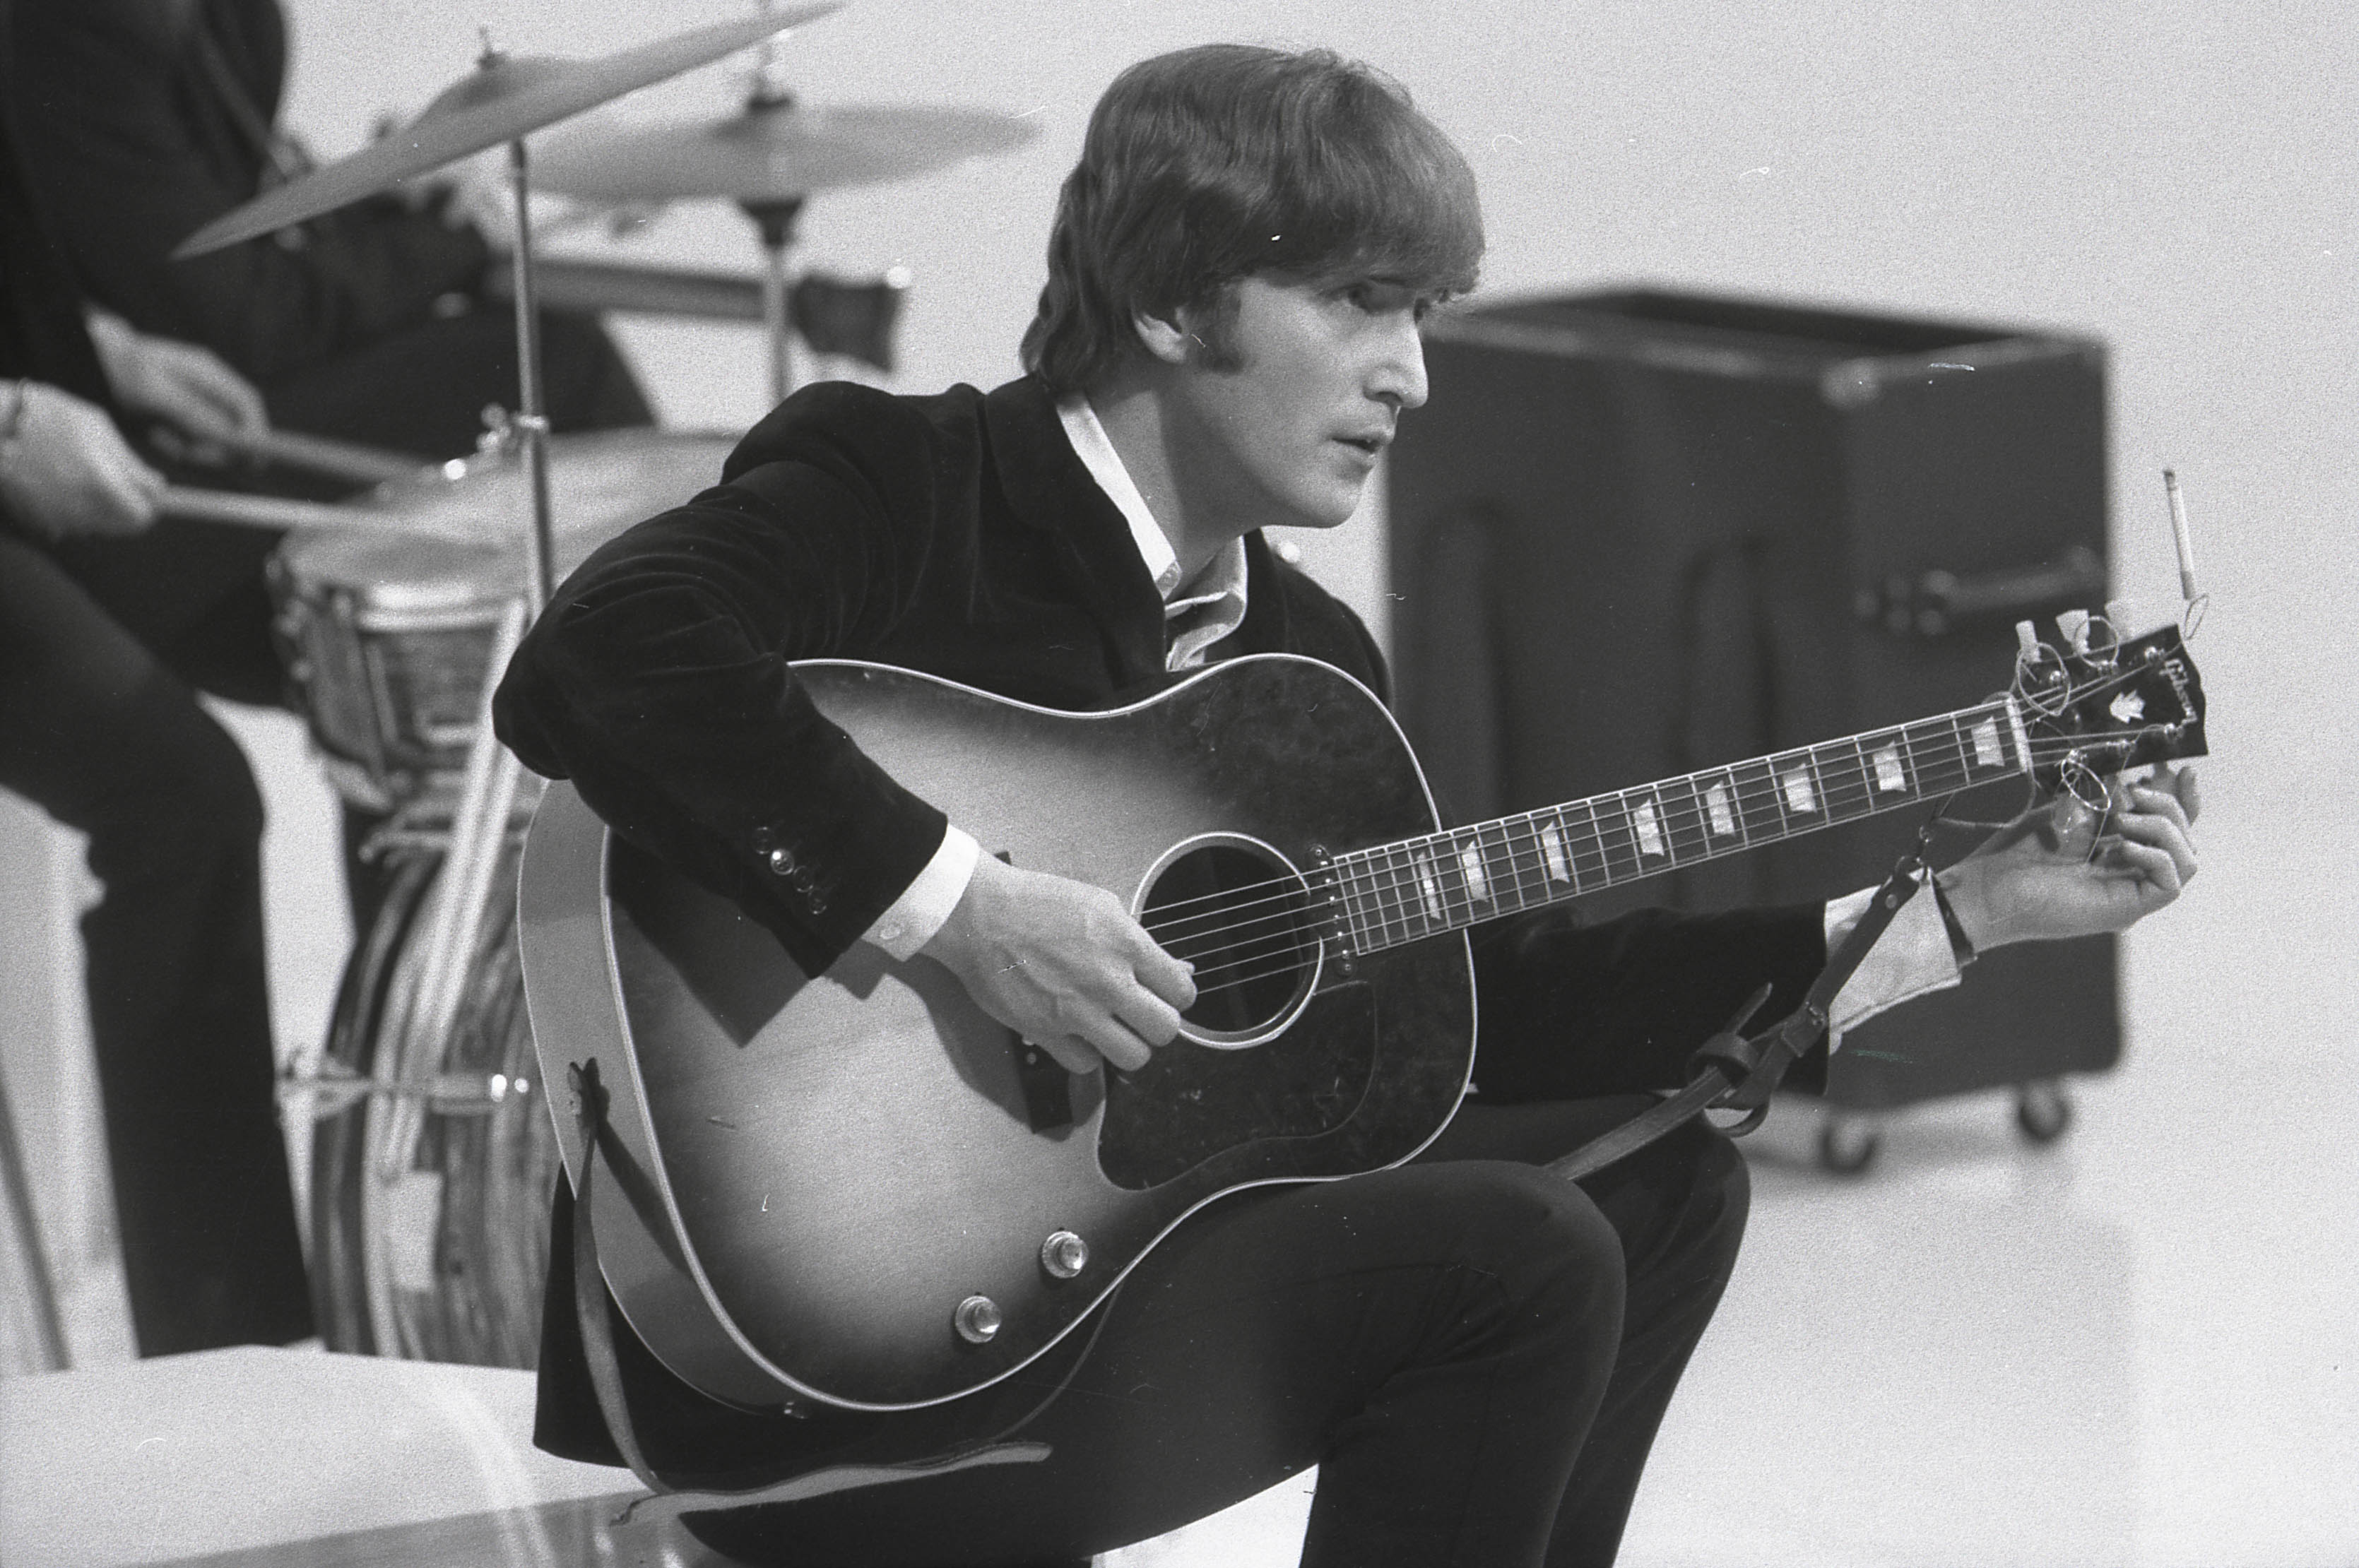 John Lennon holding a guitar during The Beatles' "We Can Work It Out" era